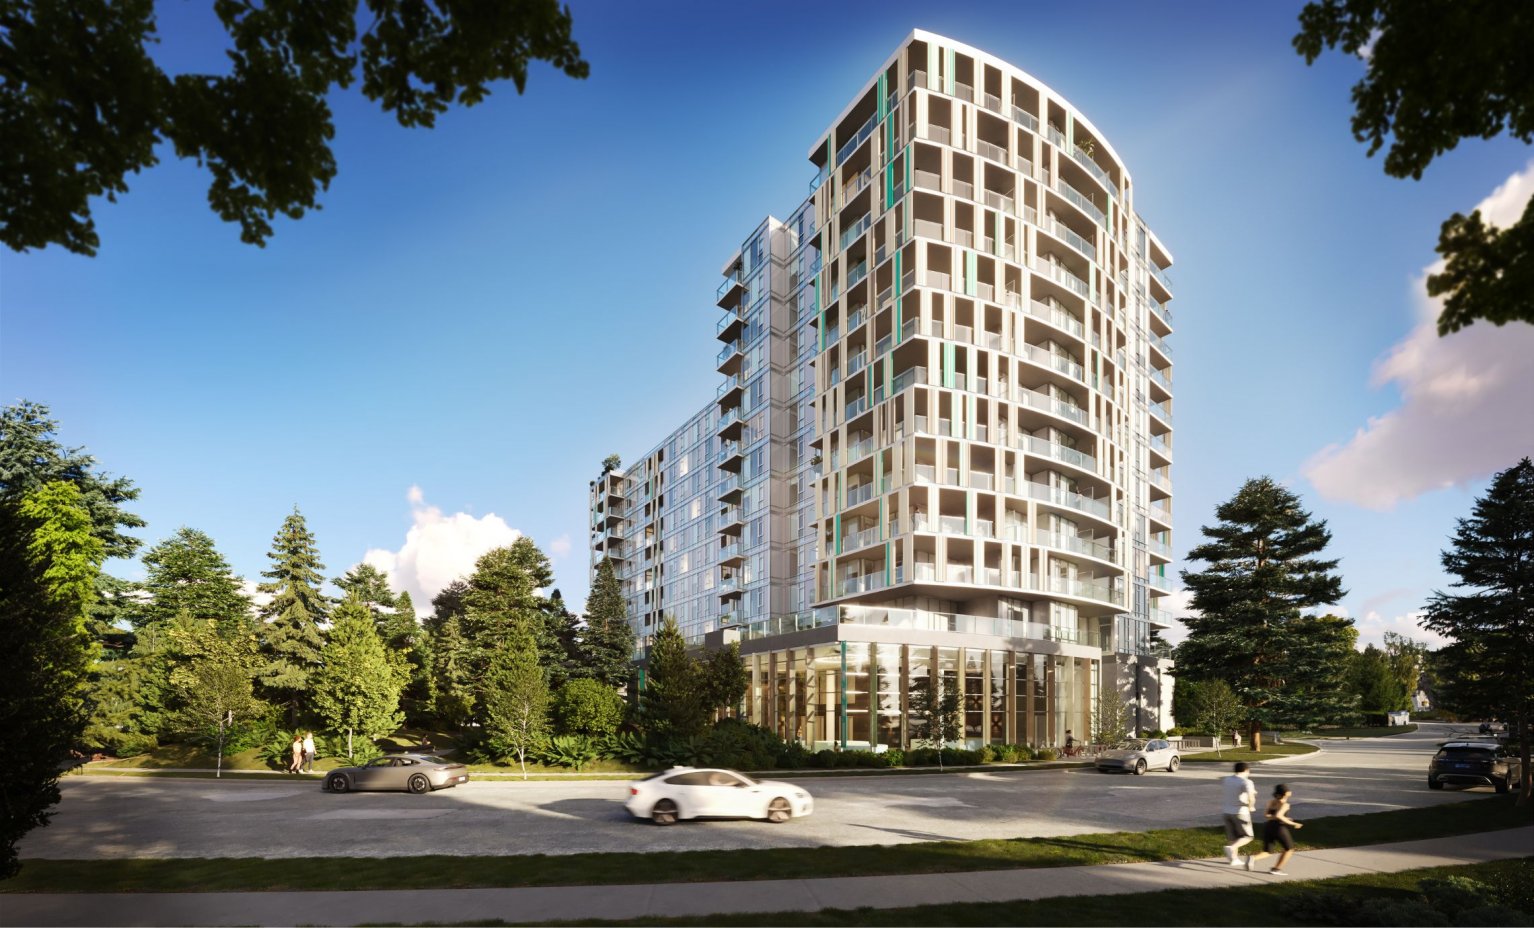 Talistar by Polygon is a master-planned community with condos, apartments, and retail space.